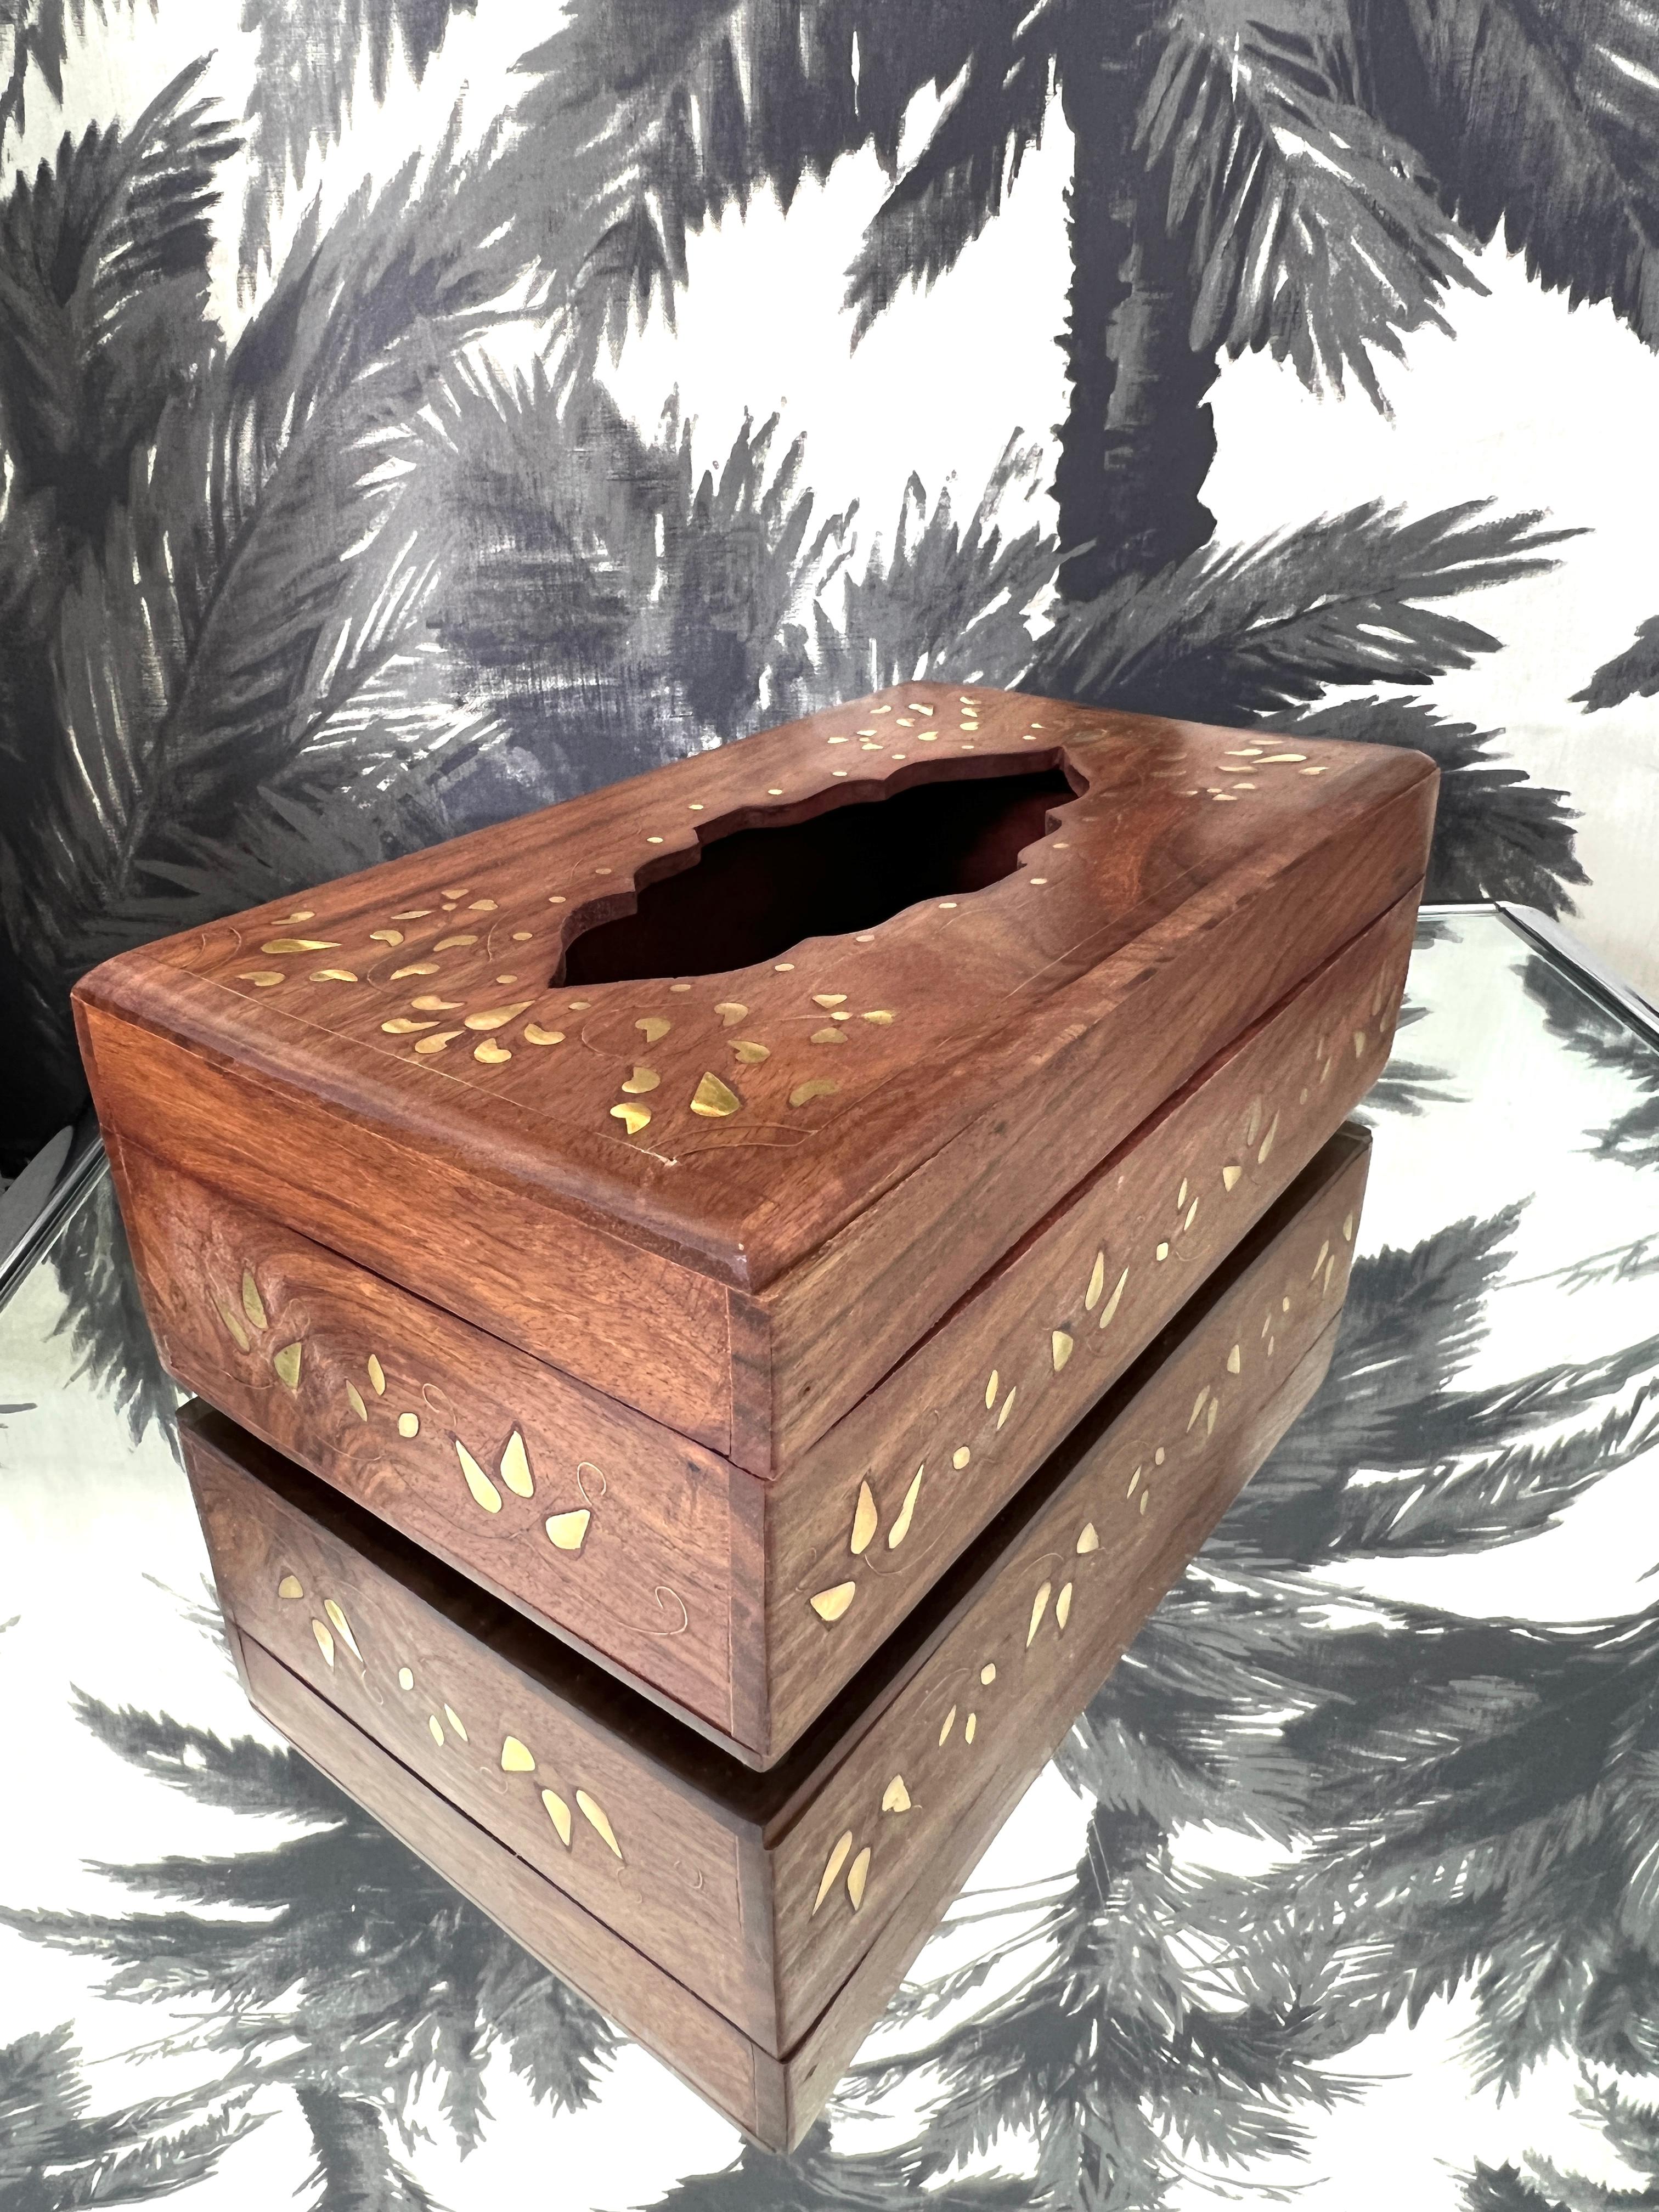 Exquisite vintage tissue box made of solid sheesham wood with exotic brass inlays. handcrafted by Indian artisans, the box has a stylized hand carved center with geometric inlays of foliage, evoking both a Moorish and Anglo-Indian design. The hinged